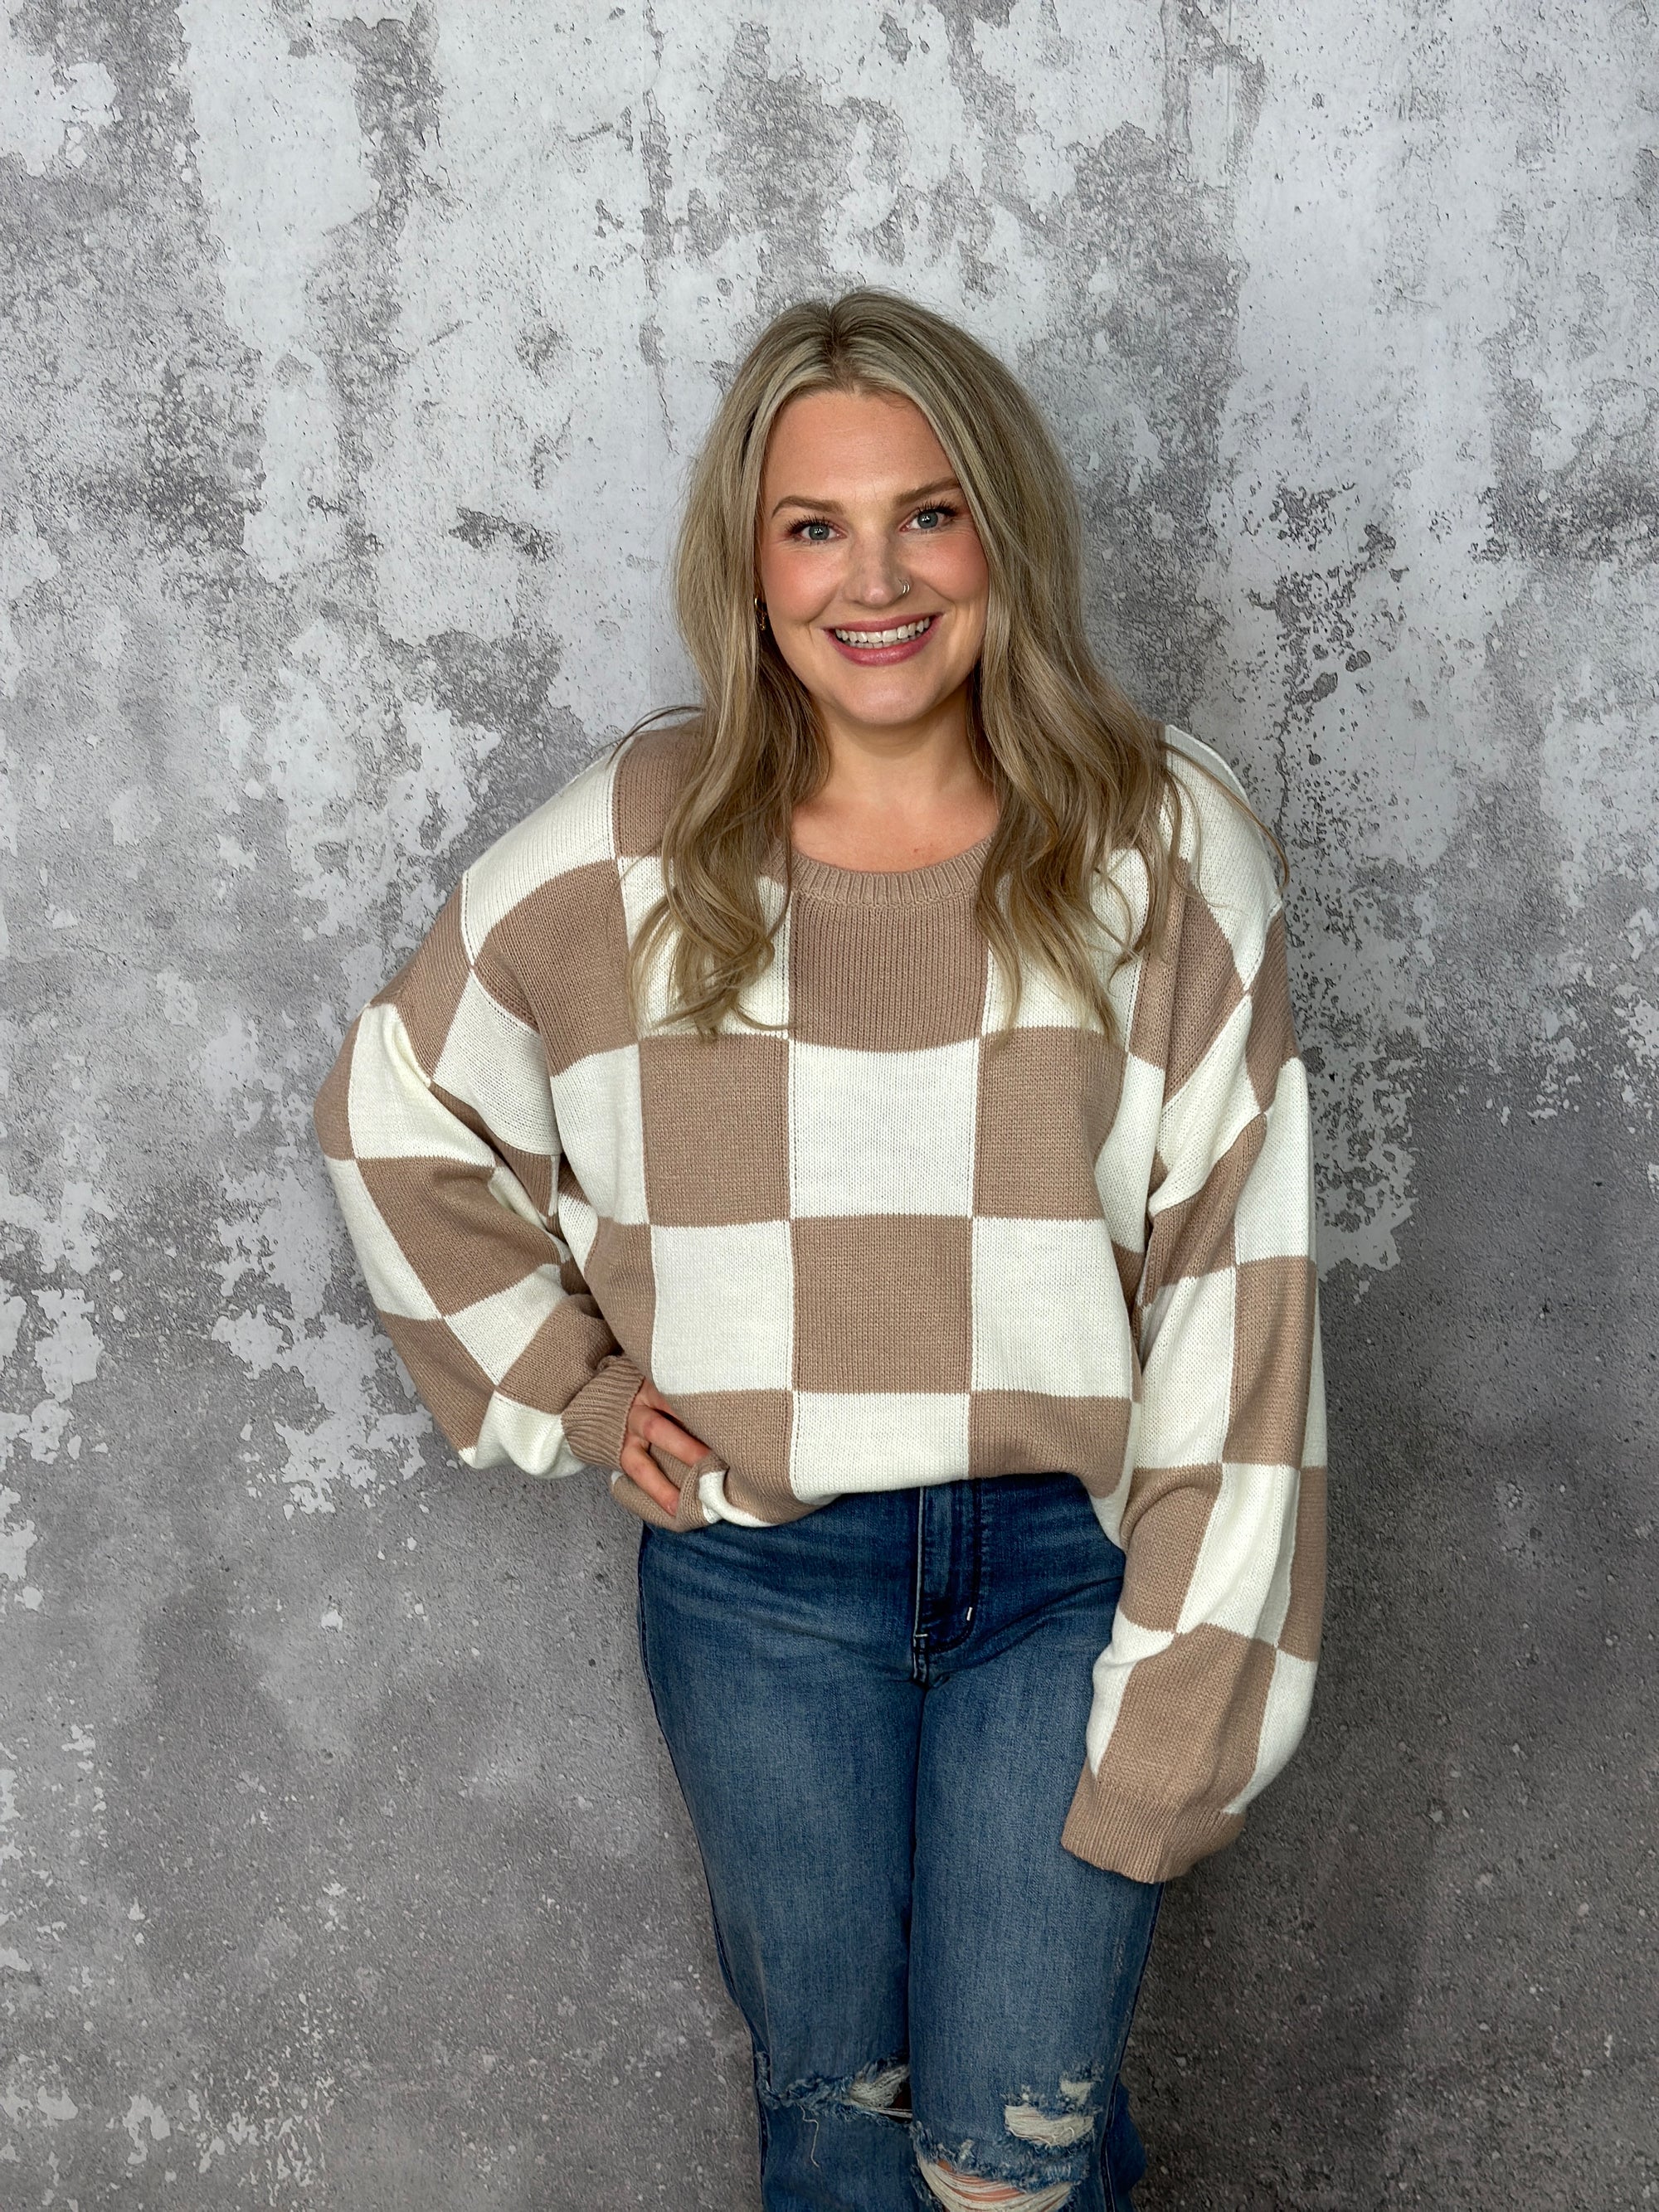 Racetrack Sweater - Tan/White (Small - 3X) LAST ONE